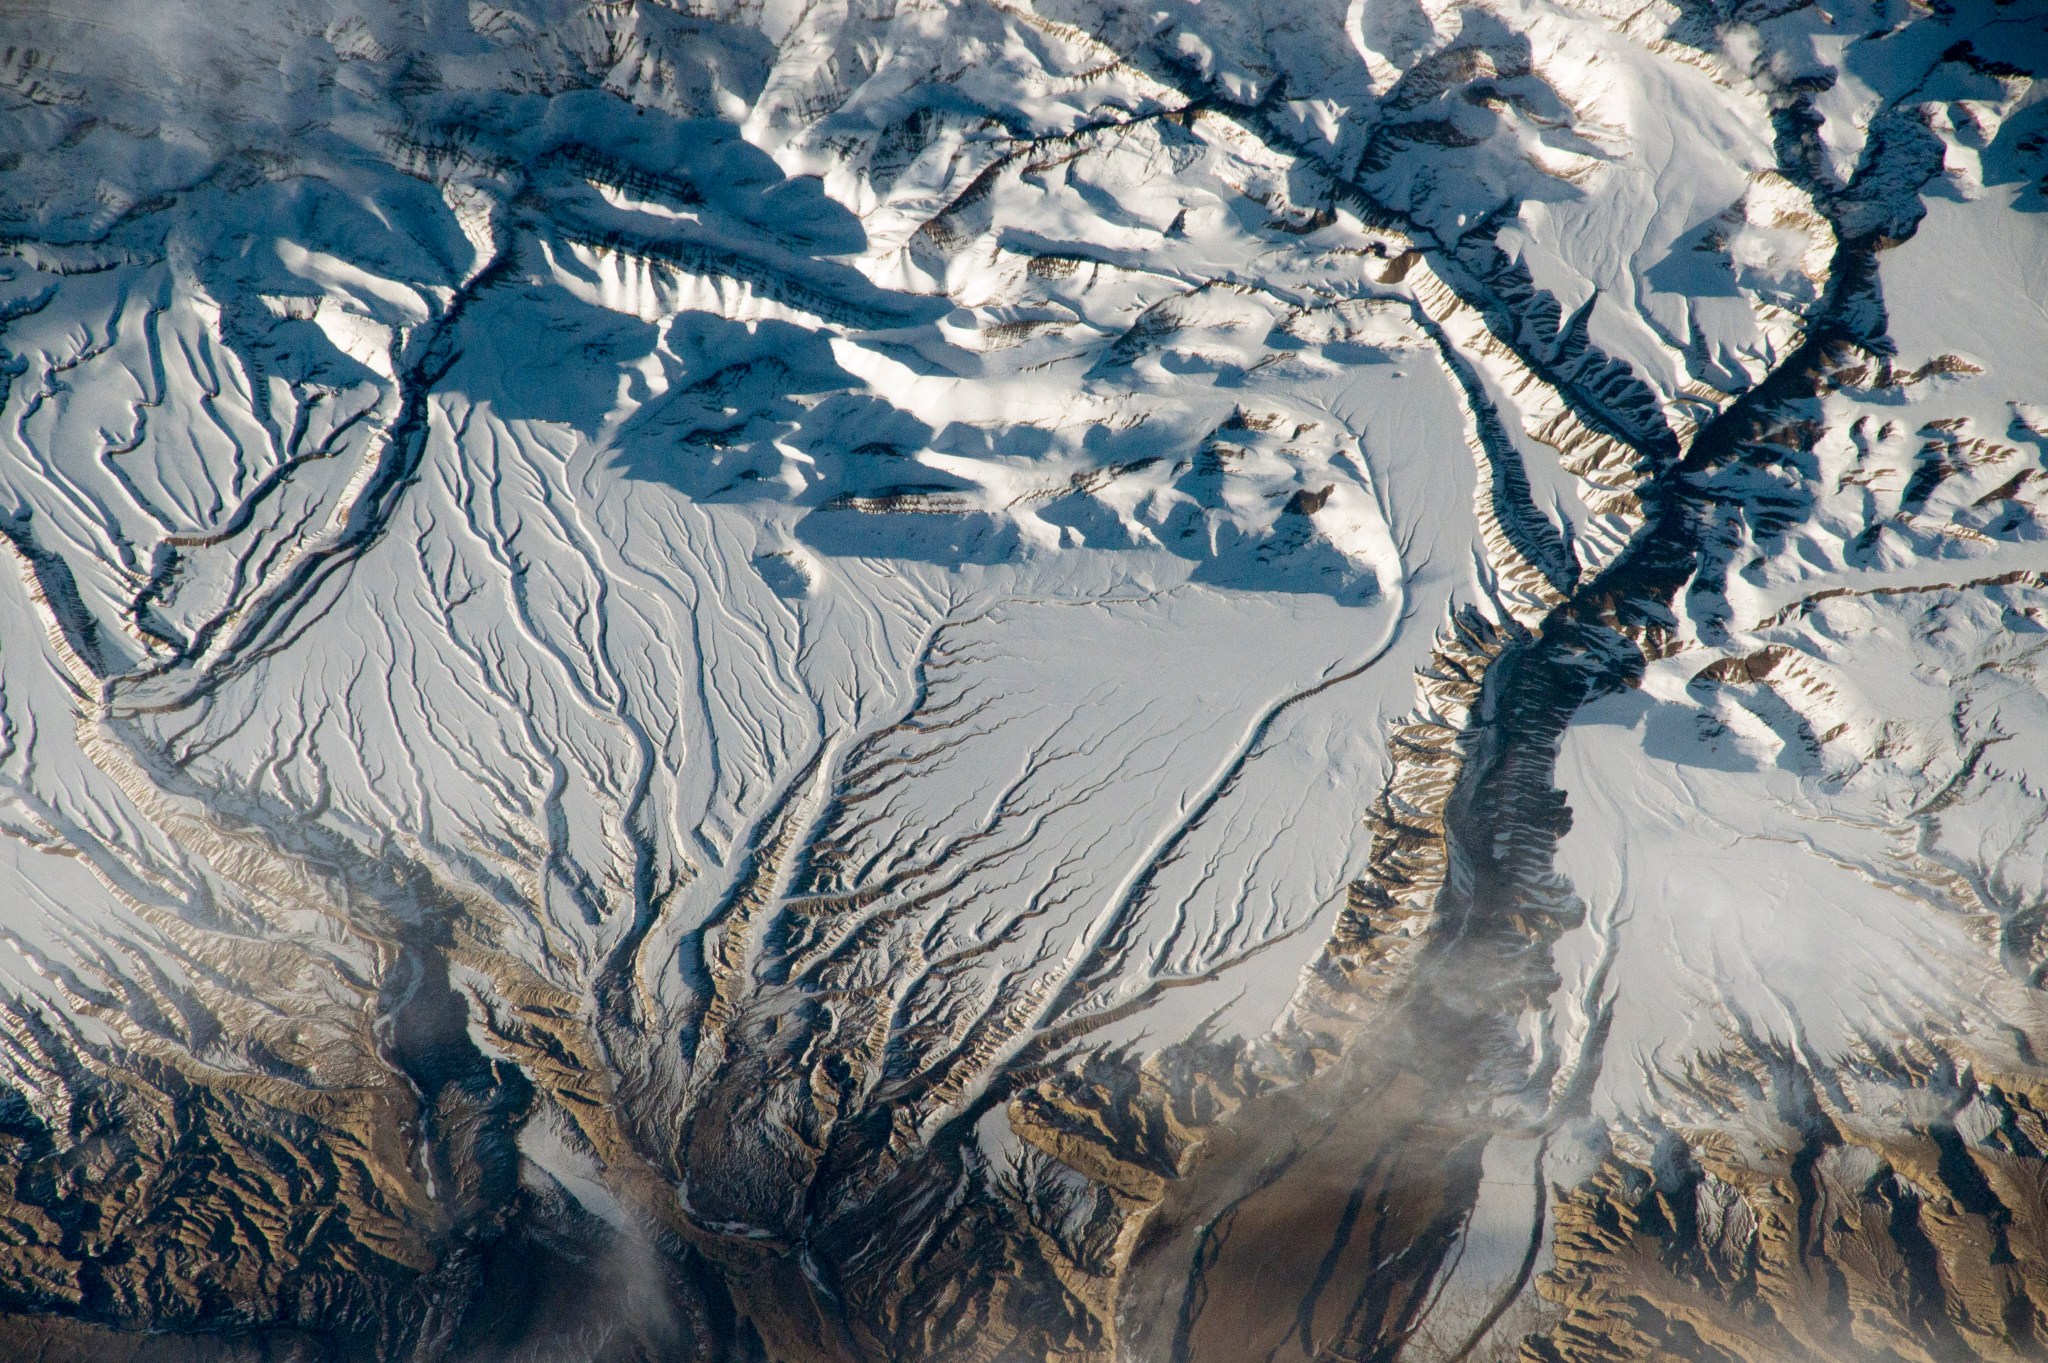 ISS image of the snow in the Himalayas